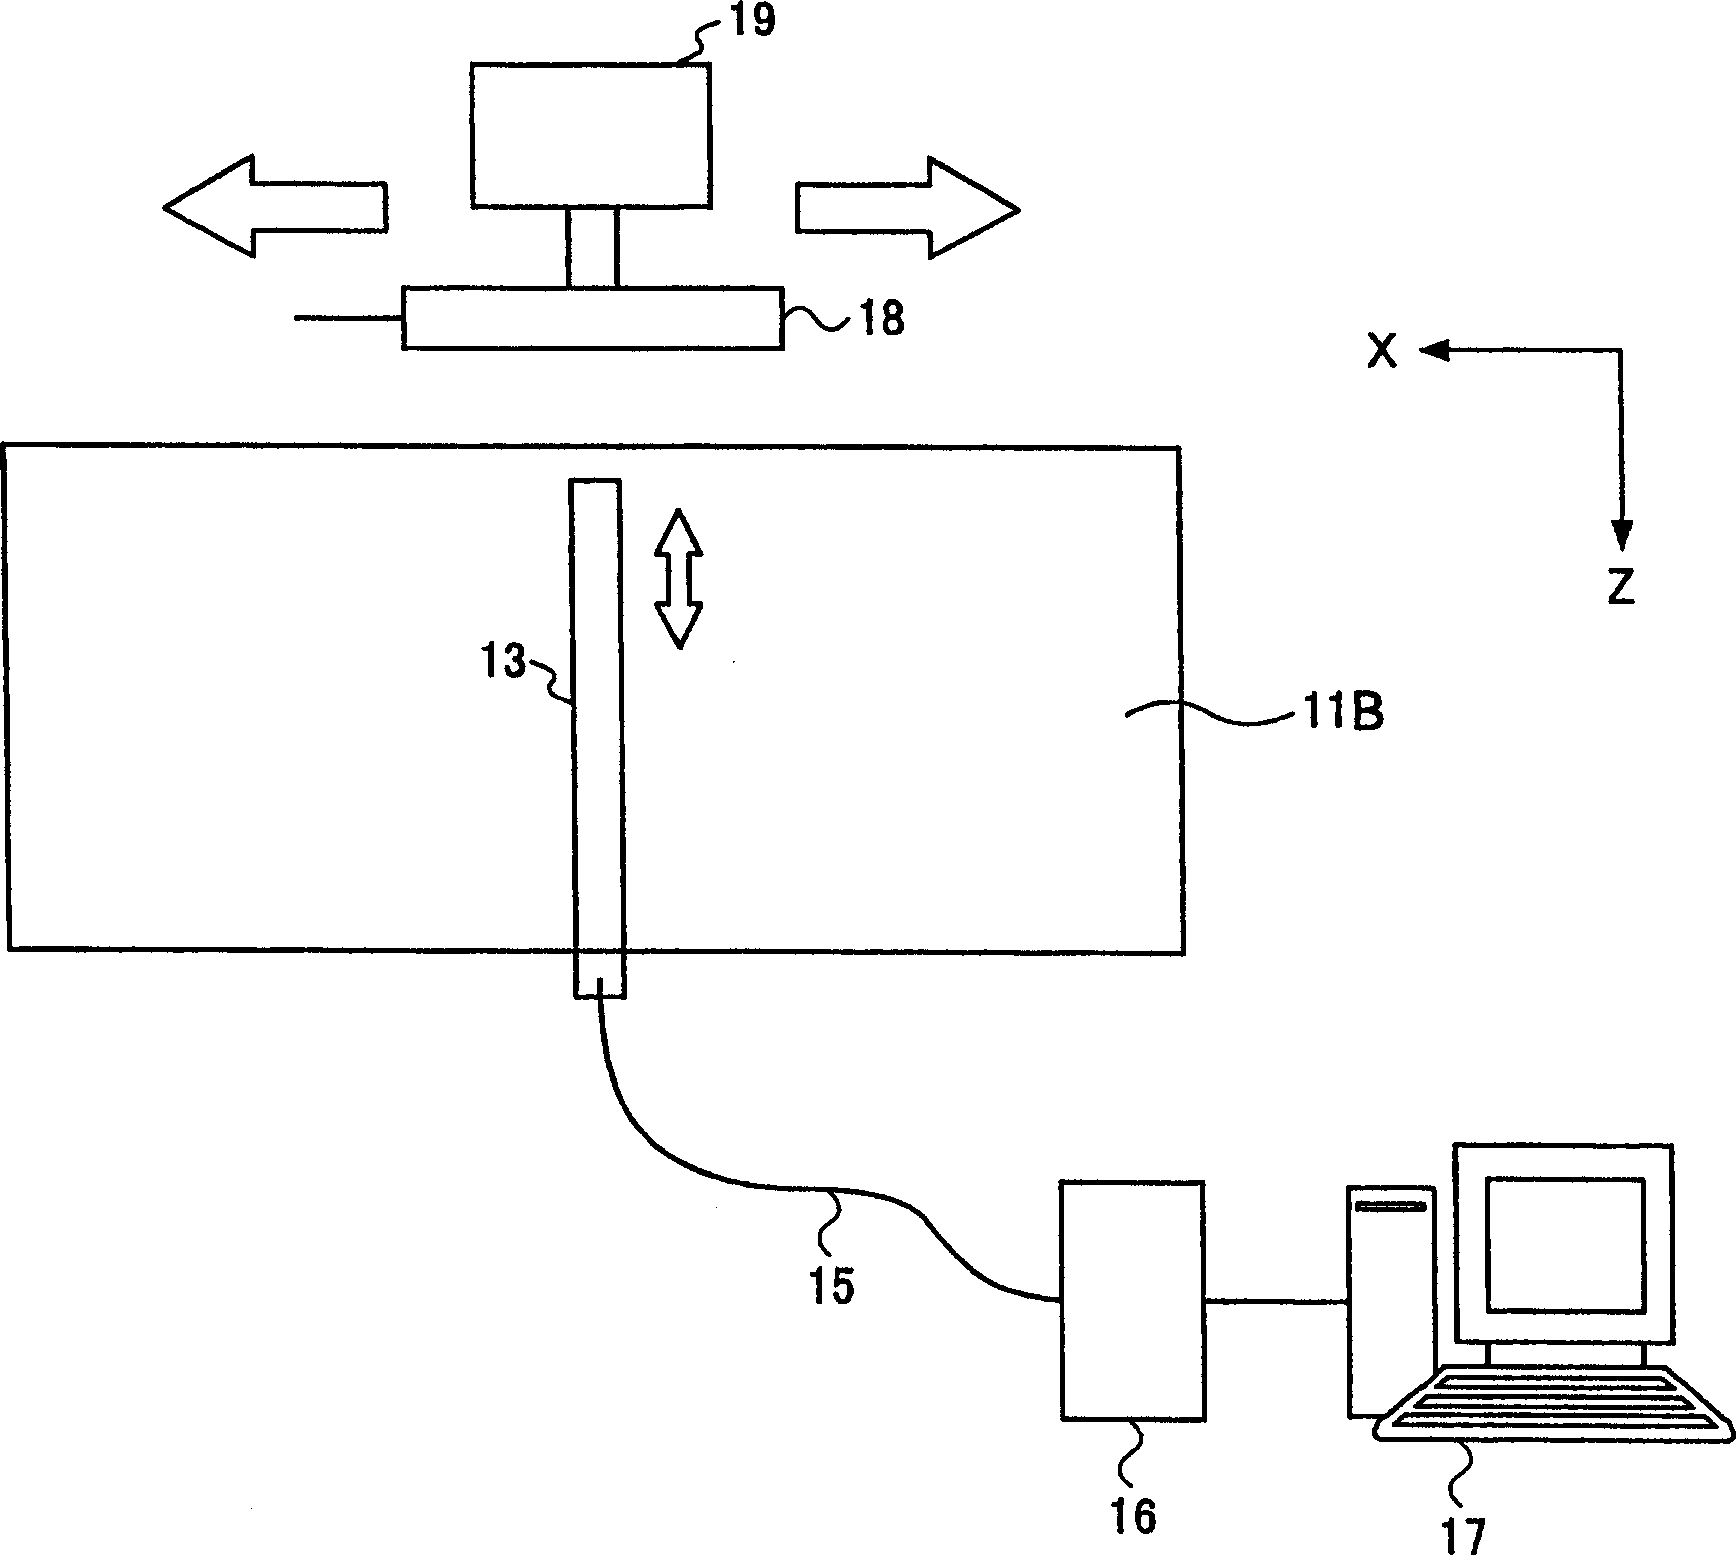 Measurement system of specific absorption rate